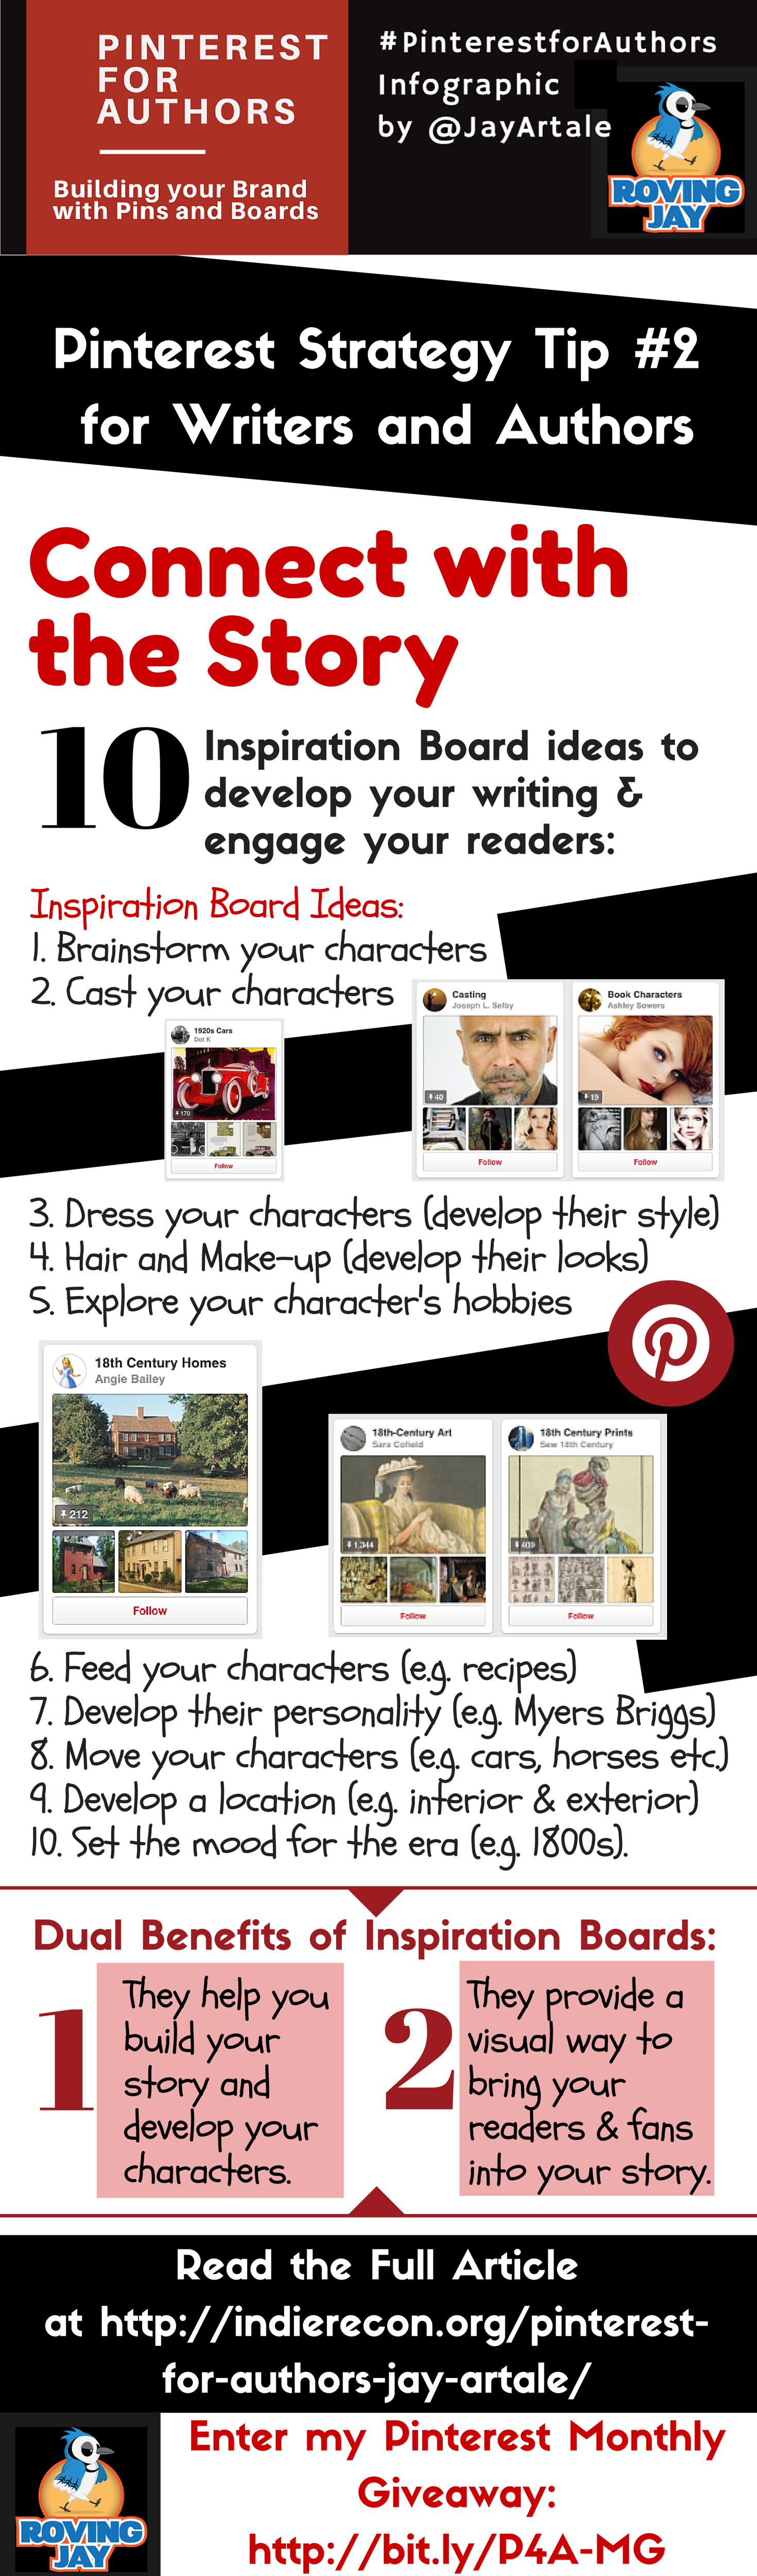 Here’s a summary of Pinterest-13